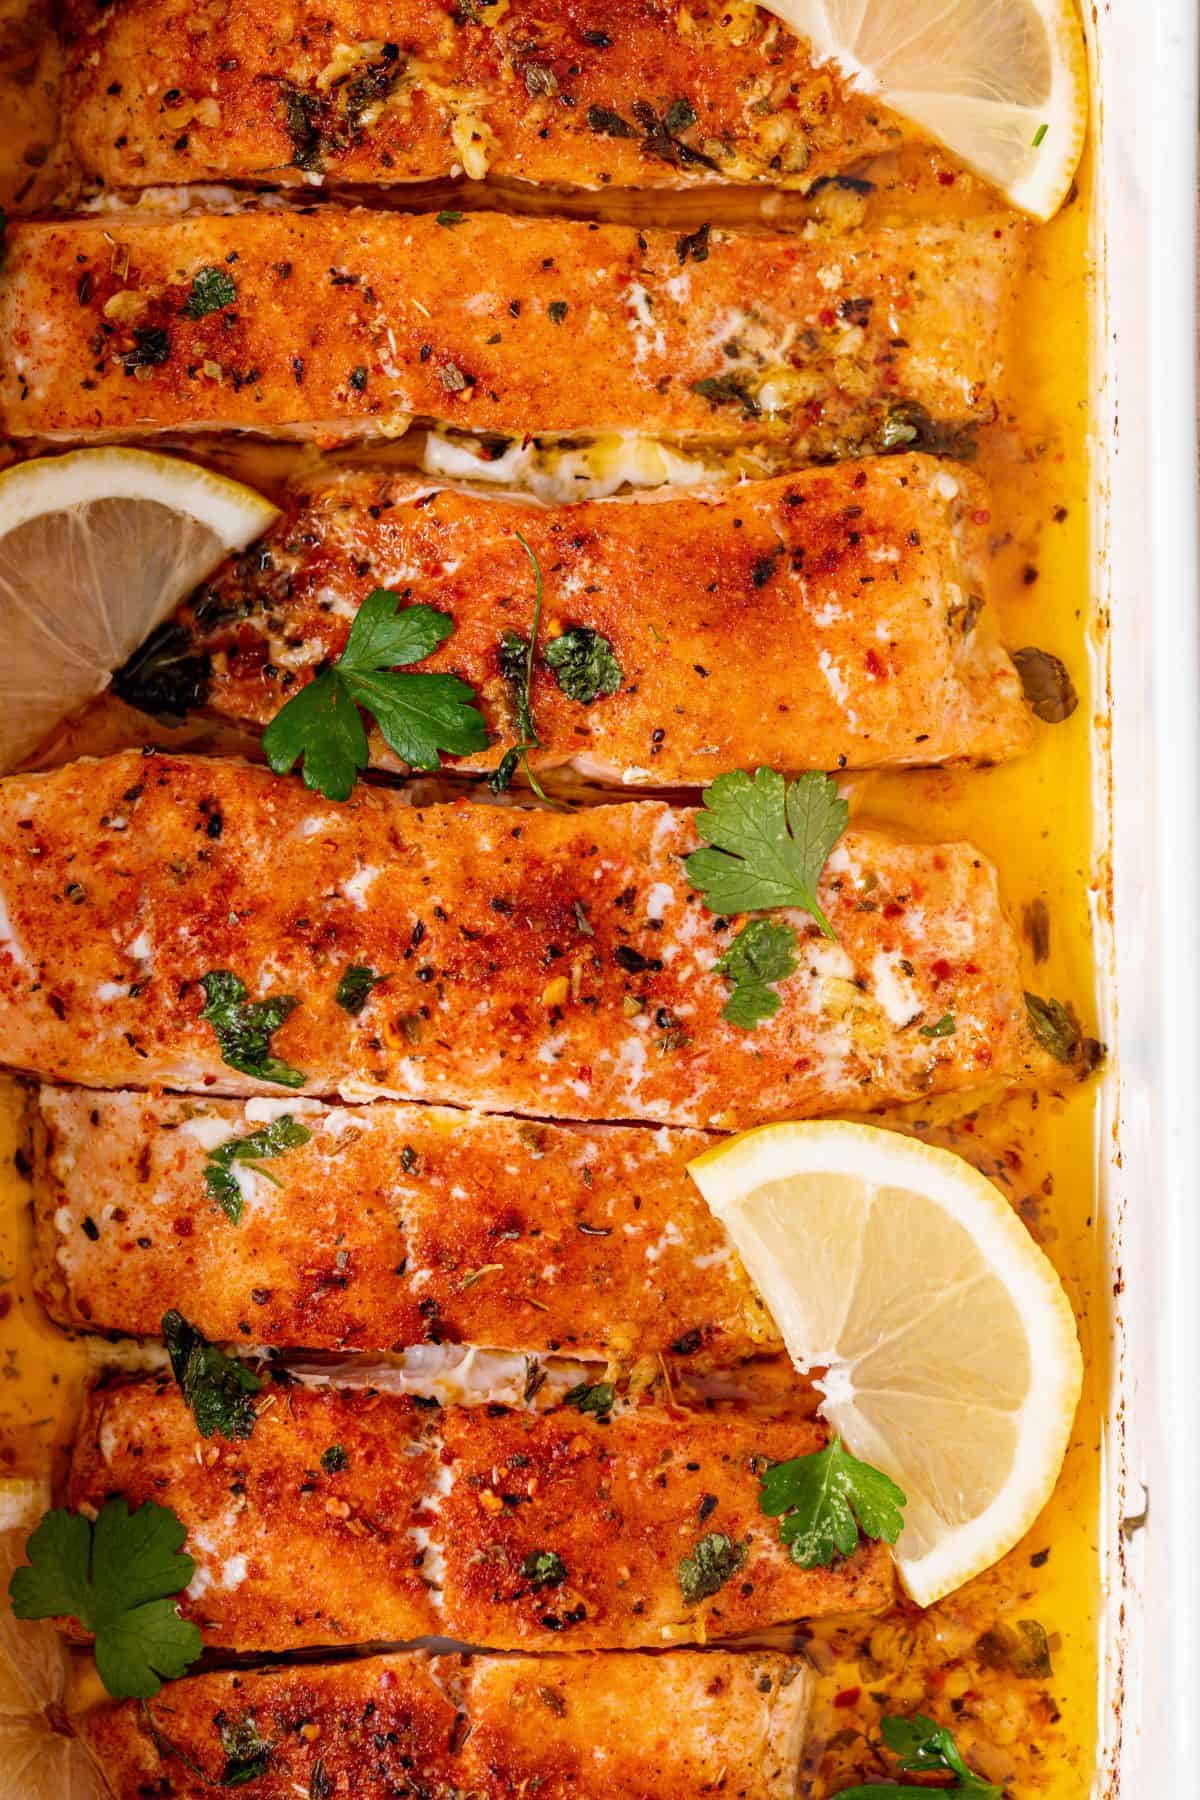 baked salmon topped with slices of lemon